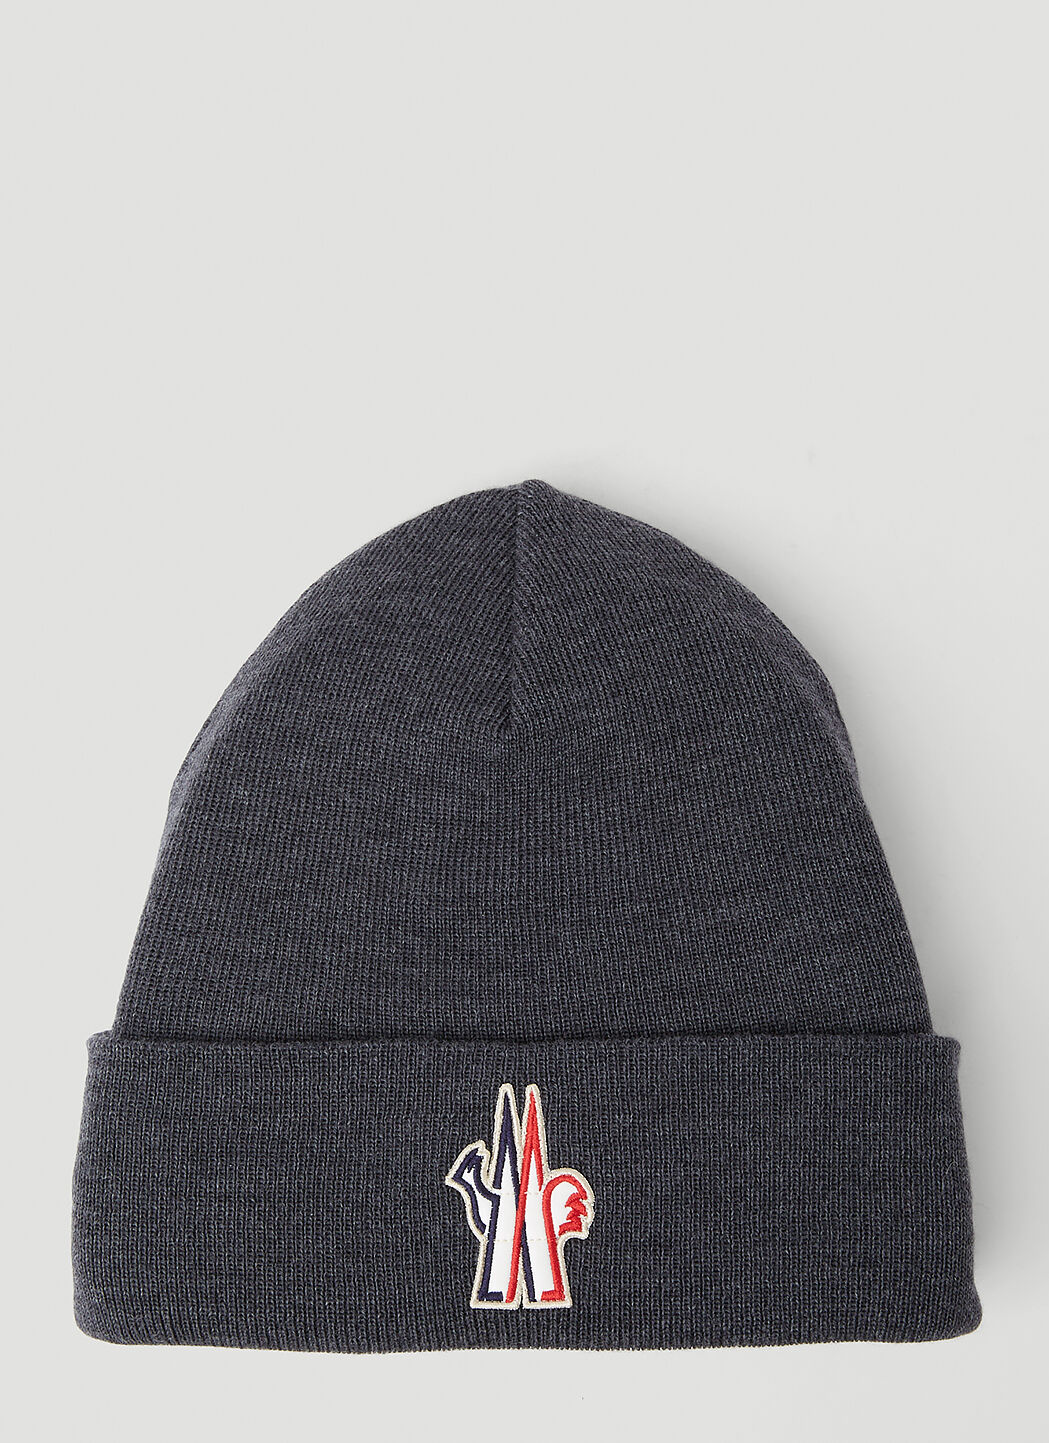 Moncler Grenoble Logo Patch Beanie Hat Brown mog0155002